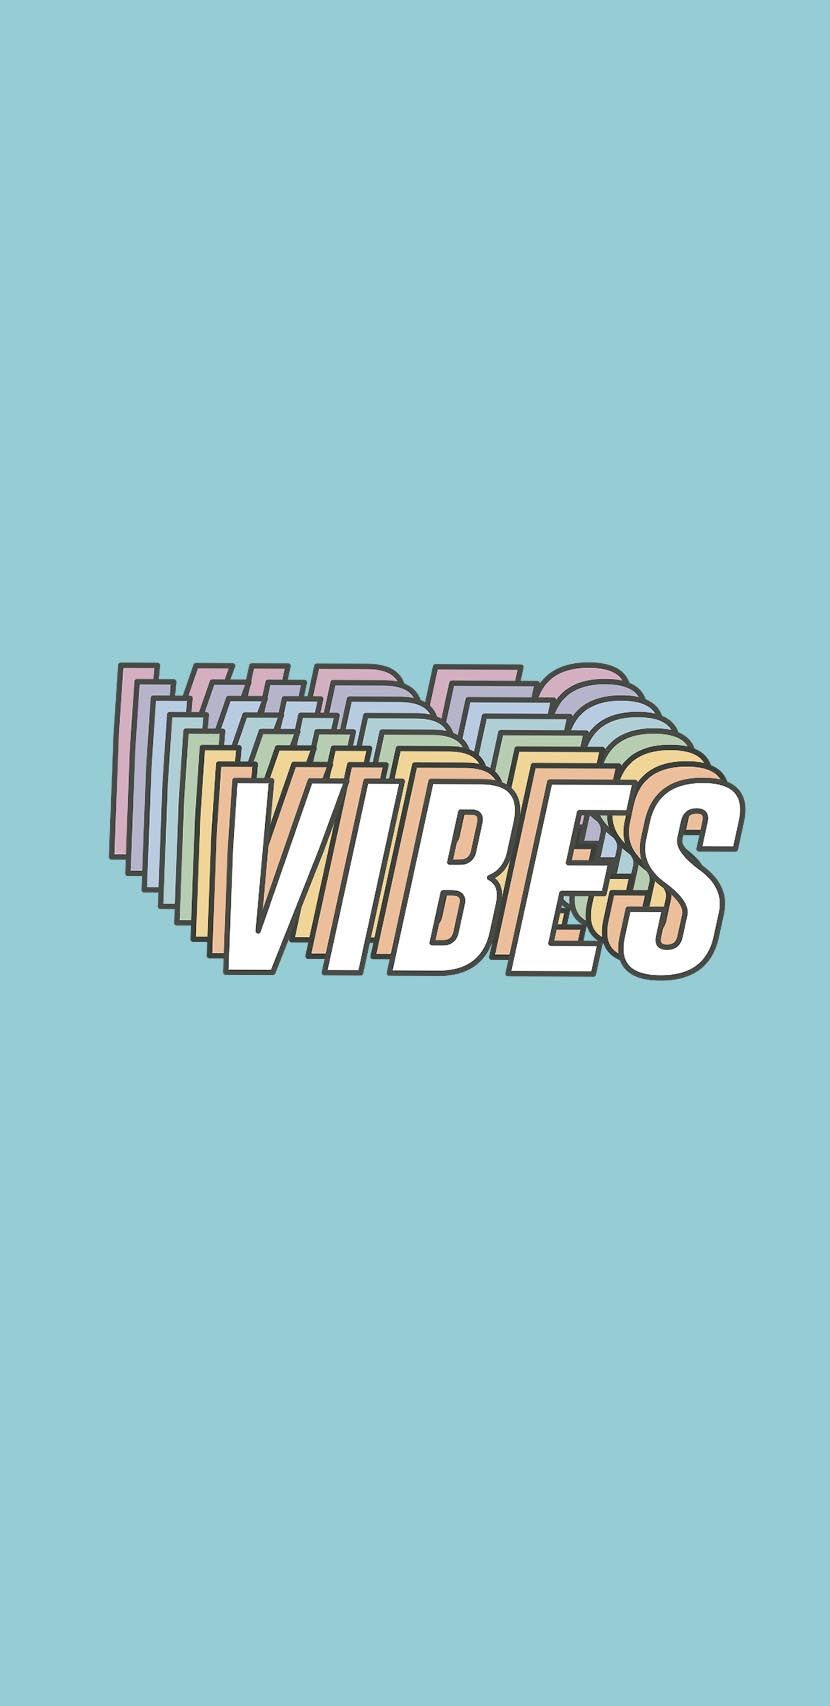 Vibes Beach Good Motivational Quote Font